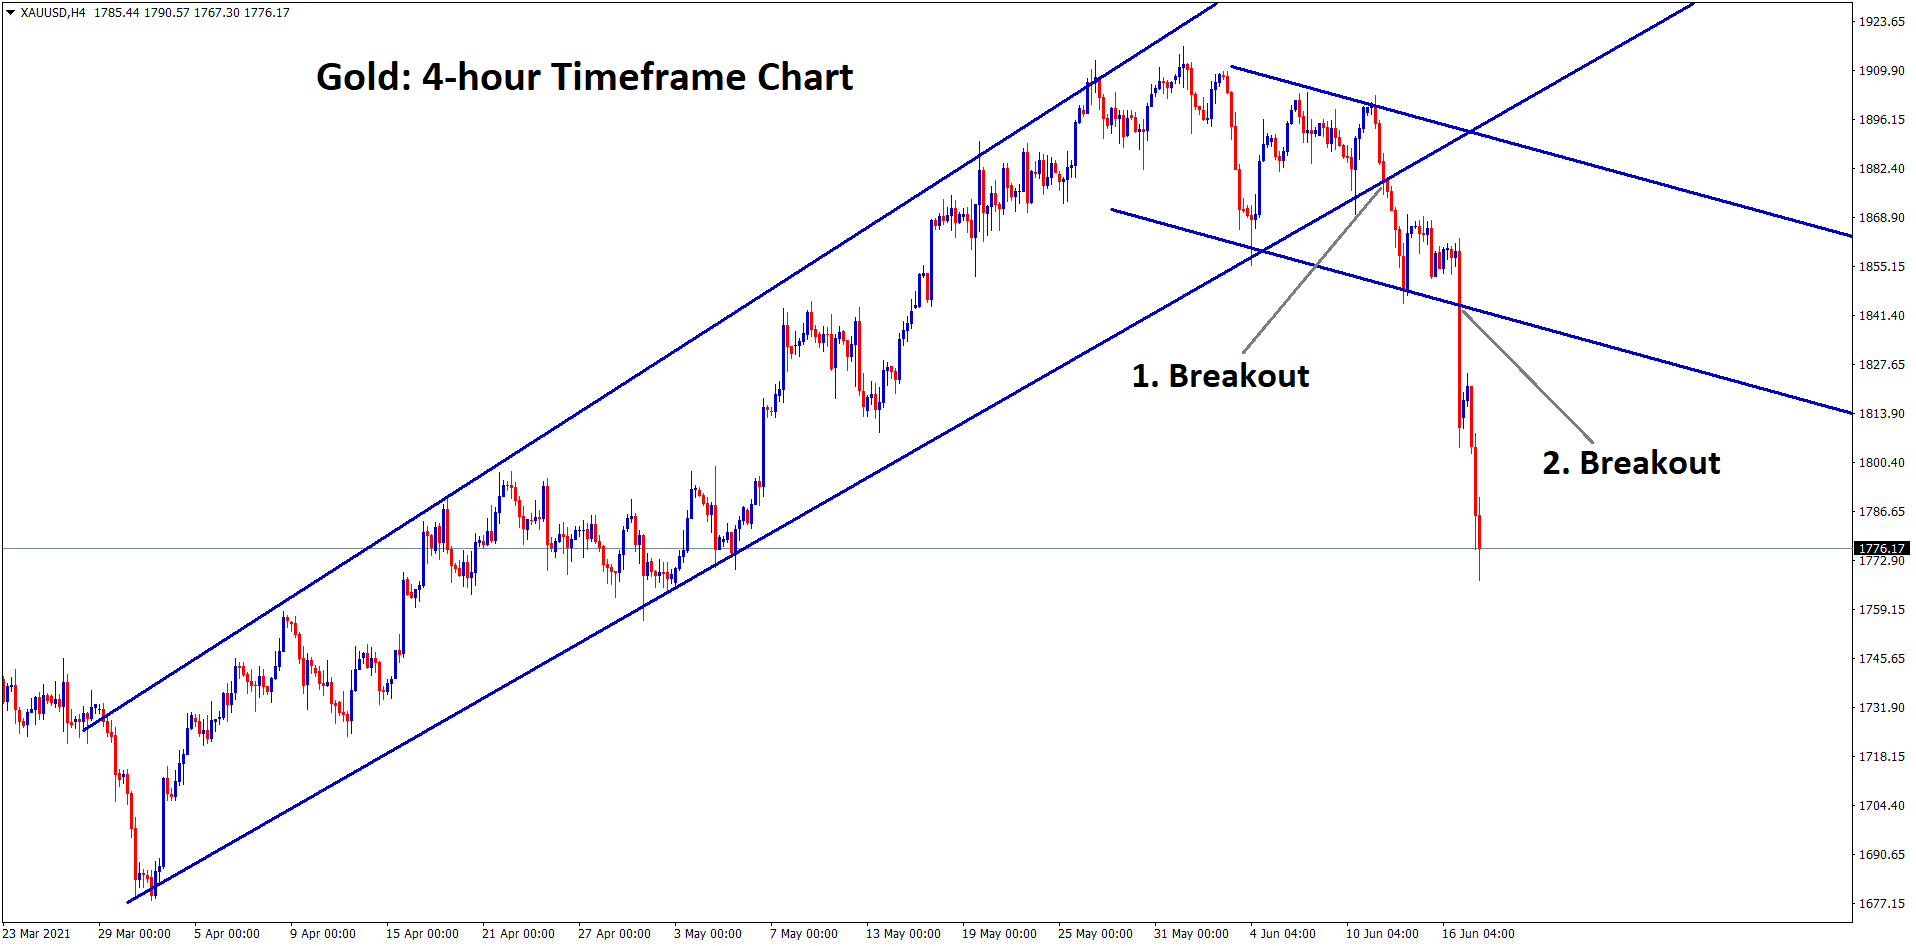 Gold has broken the bottom level of the major uptrend line first next the gold price has broken the bottom level of the descending channel consolidation range